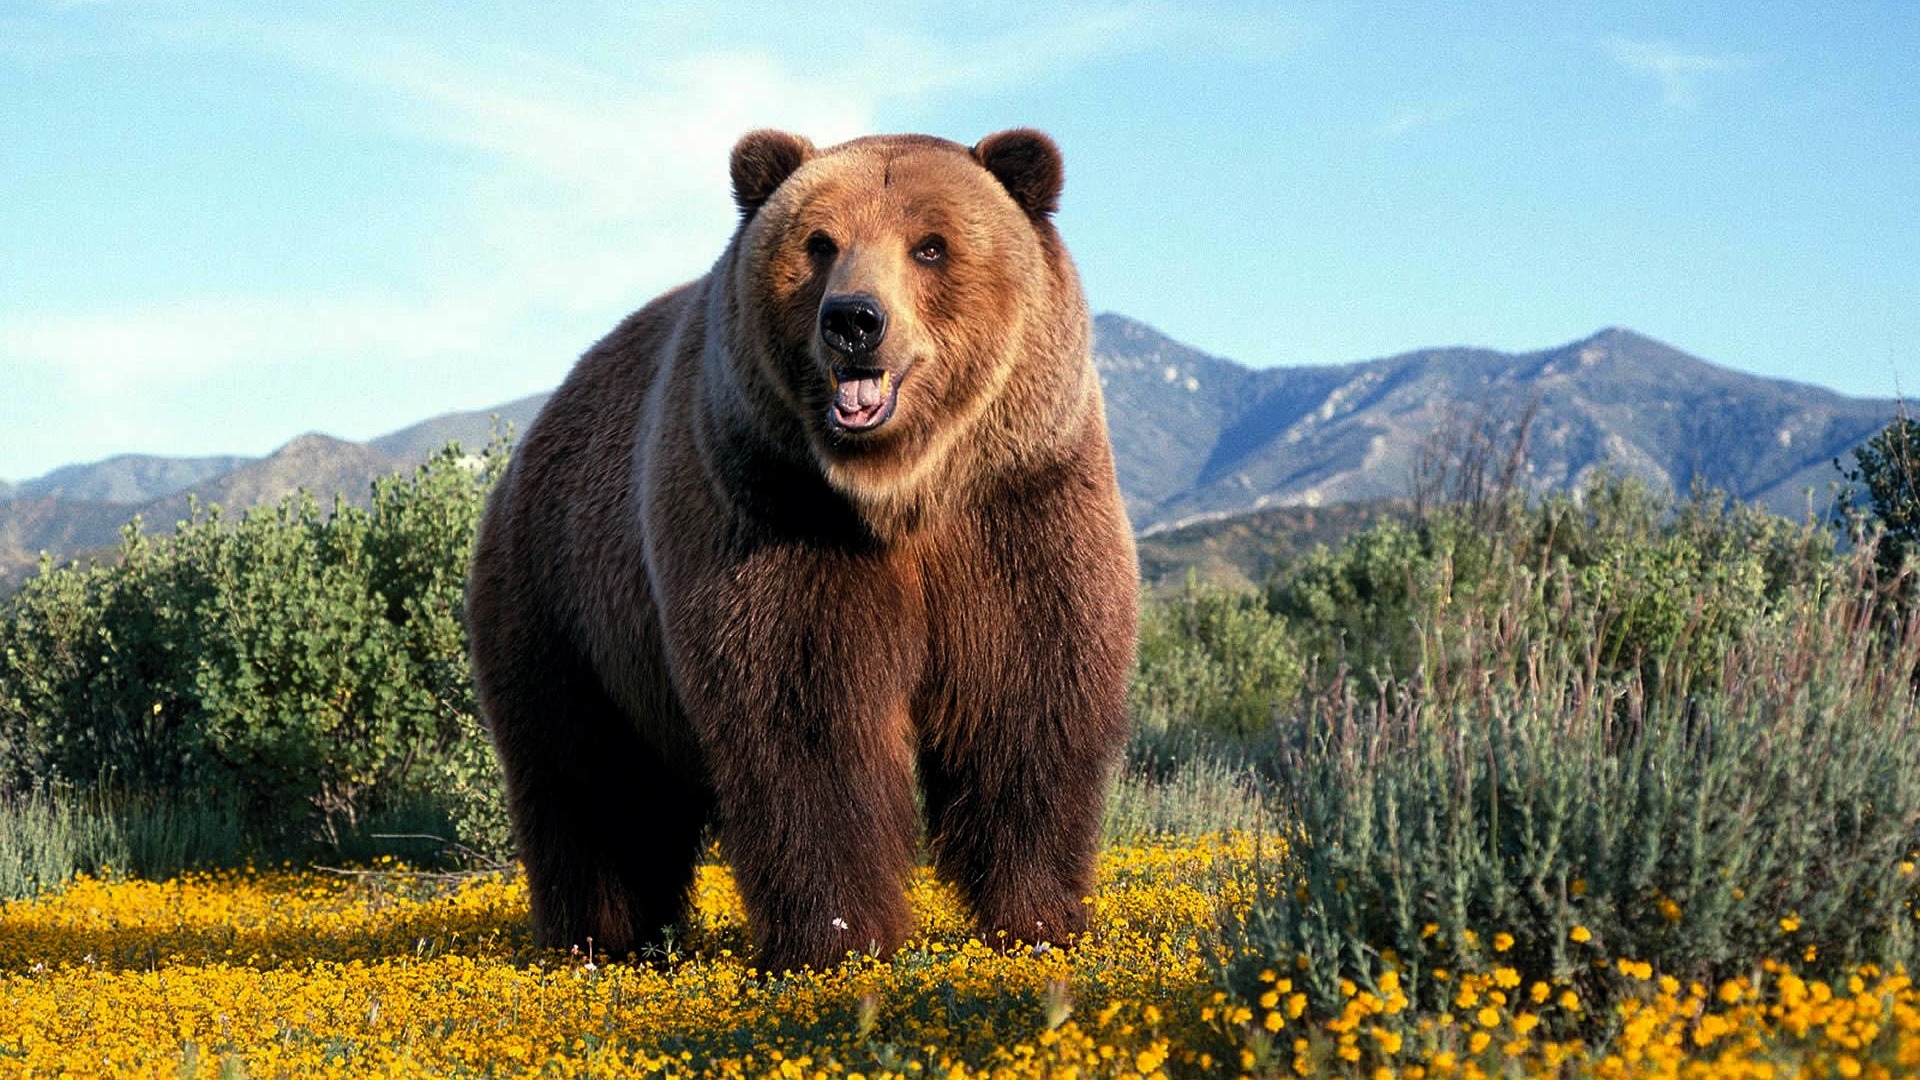 Amazing Grizzly Bear for 1920 x 1080 HDTV 1080p resolution